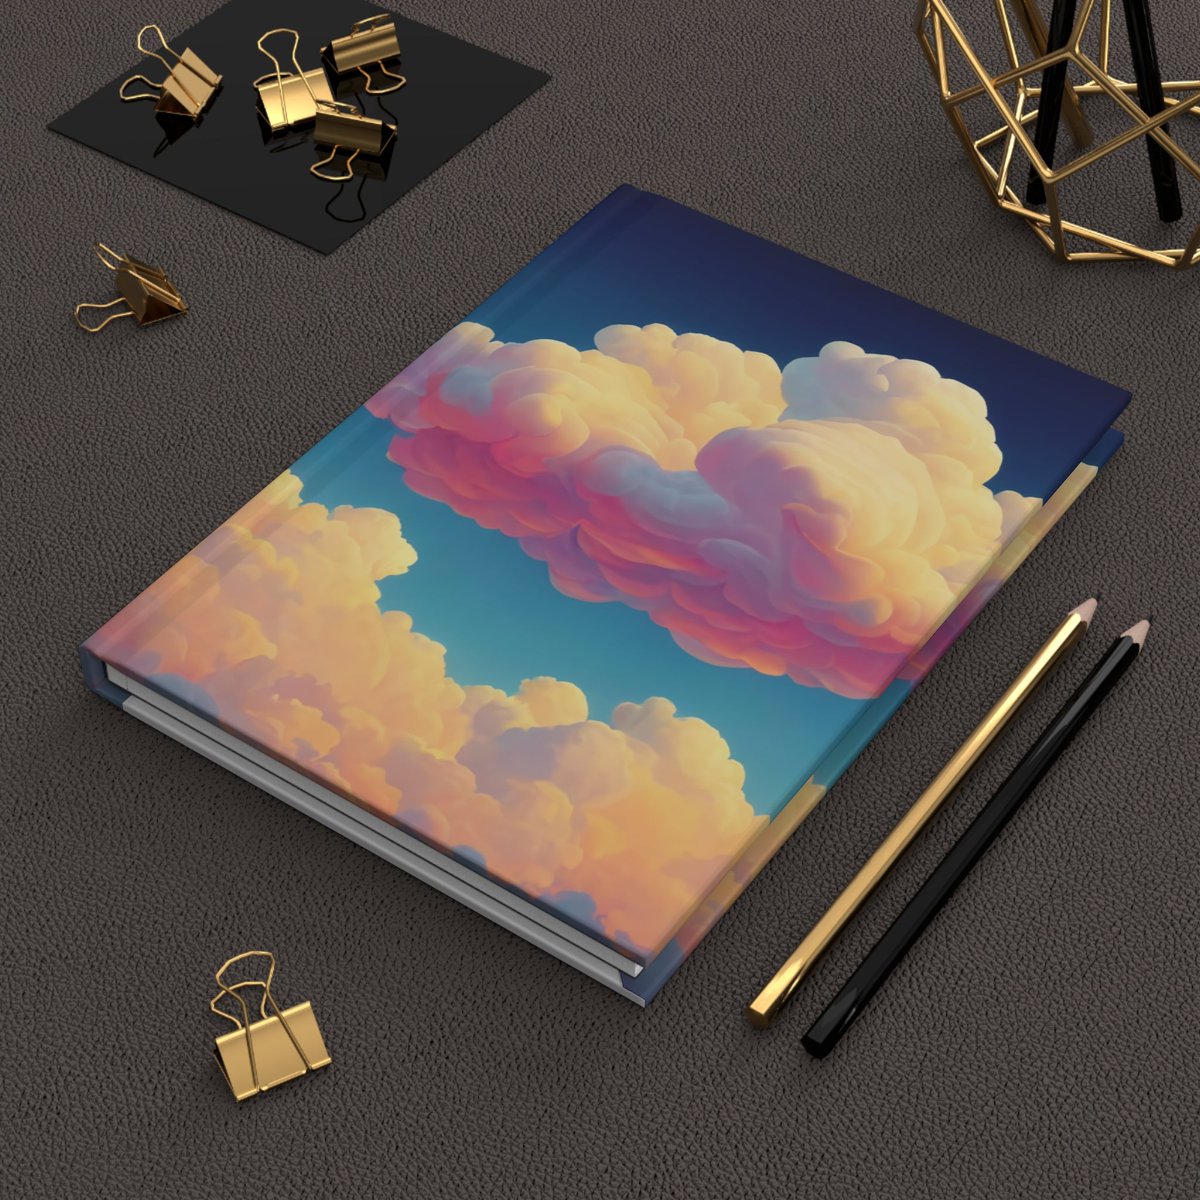 PLUSH BOY COTTON CANDY CLOUDS HARDCOVER JOURNAL 👇 Make your everyday journaling more personal, private, and stylish with this matte hardcover journal. Available in 5.75'x8', with 150 lined pages, thes... postdolphin.com/t/LKPOI